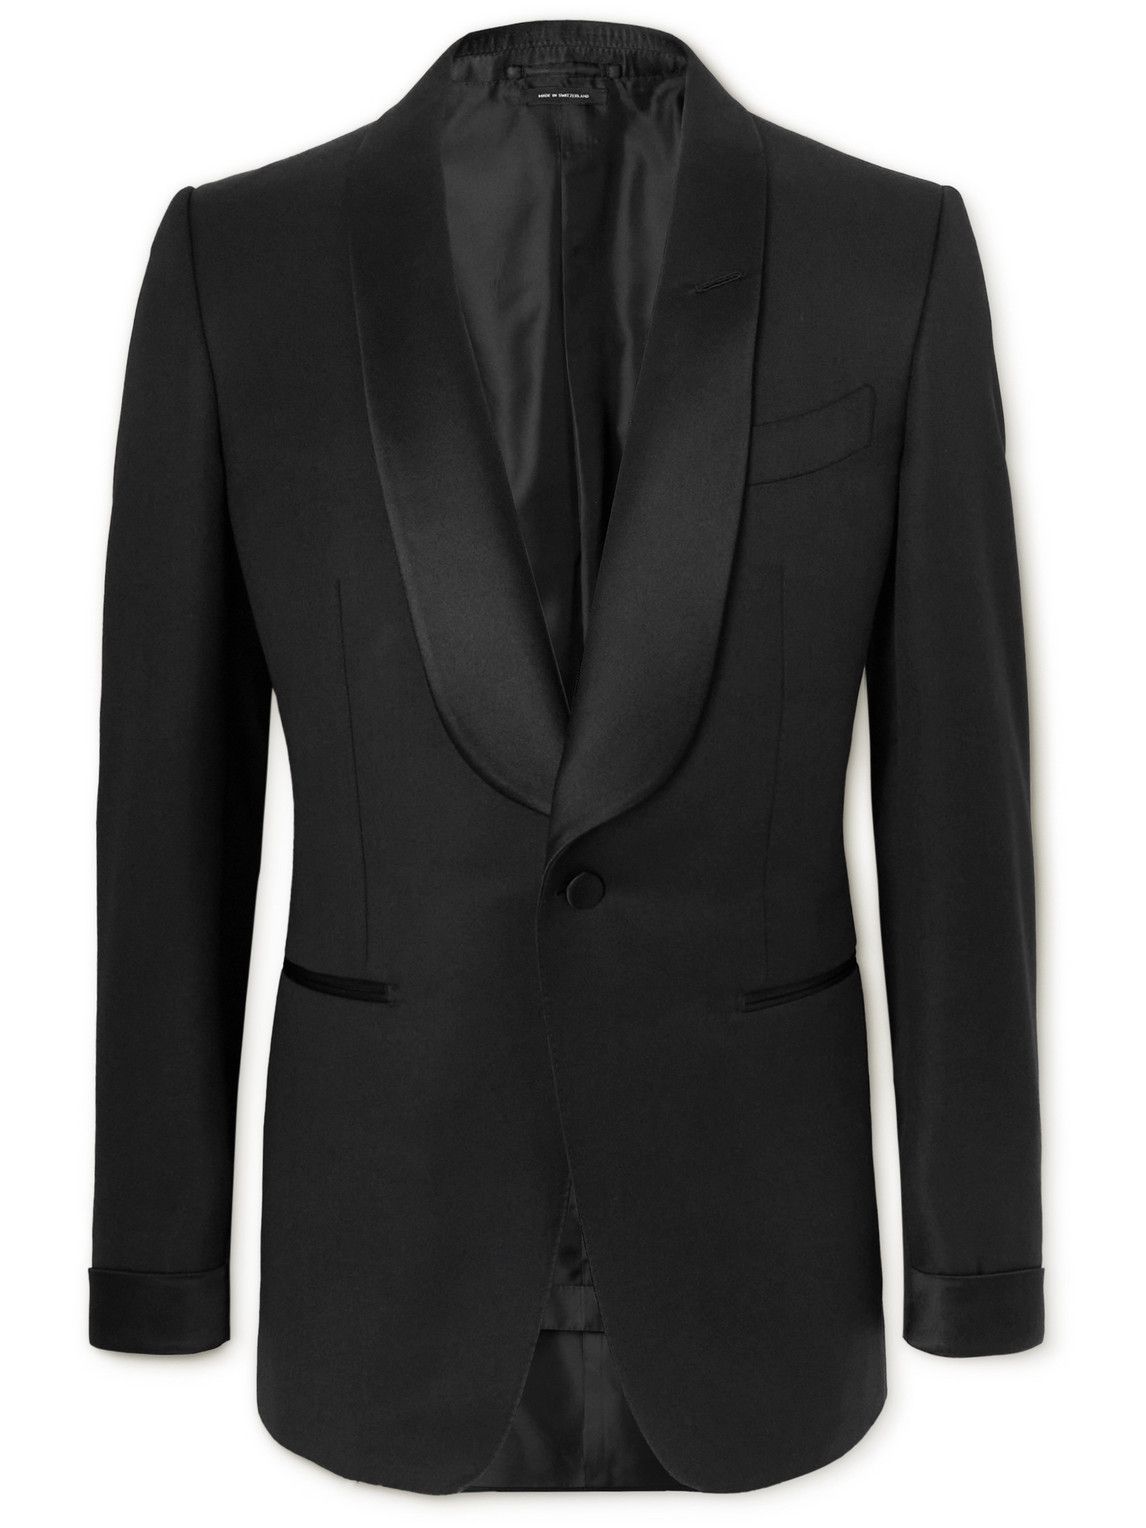 TOM FORD - O'Connor Slim-Fit Grain de Poudre Wool and Mohair-Blend ...